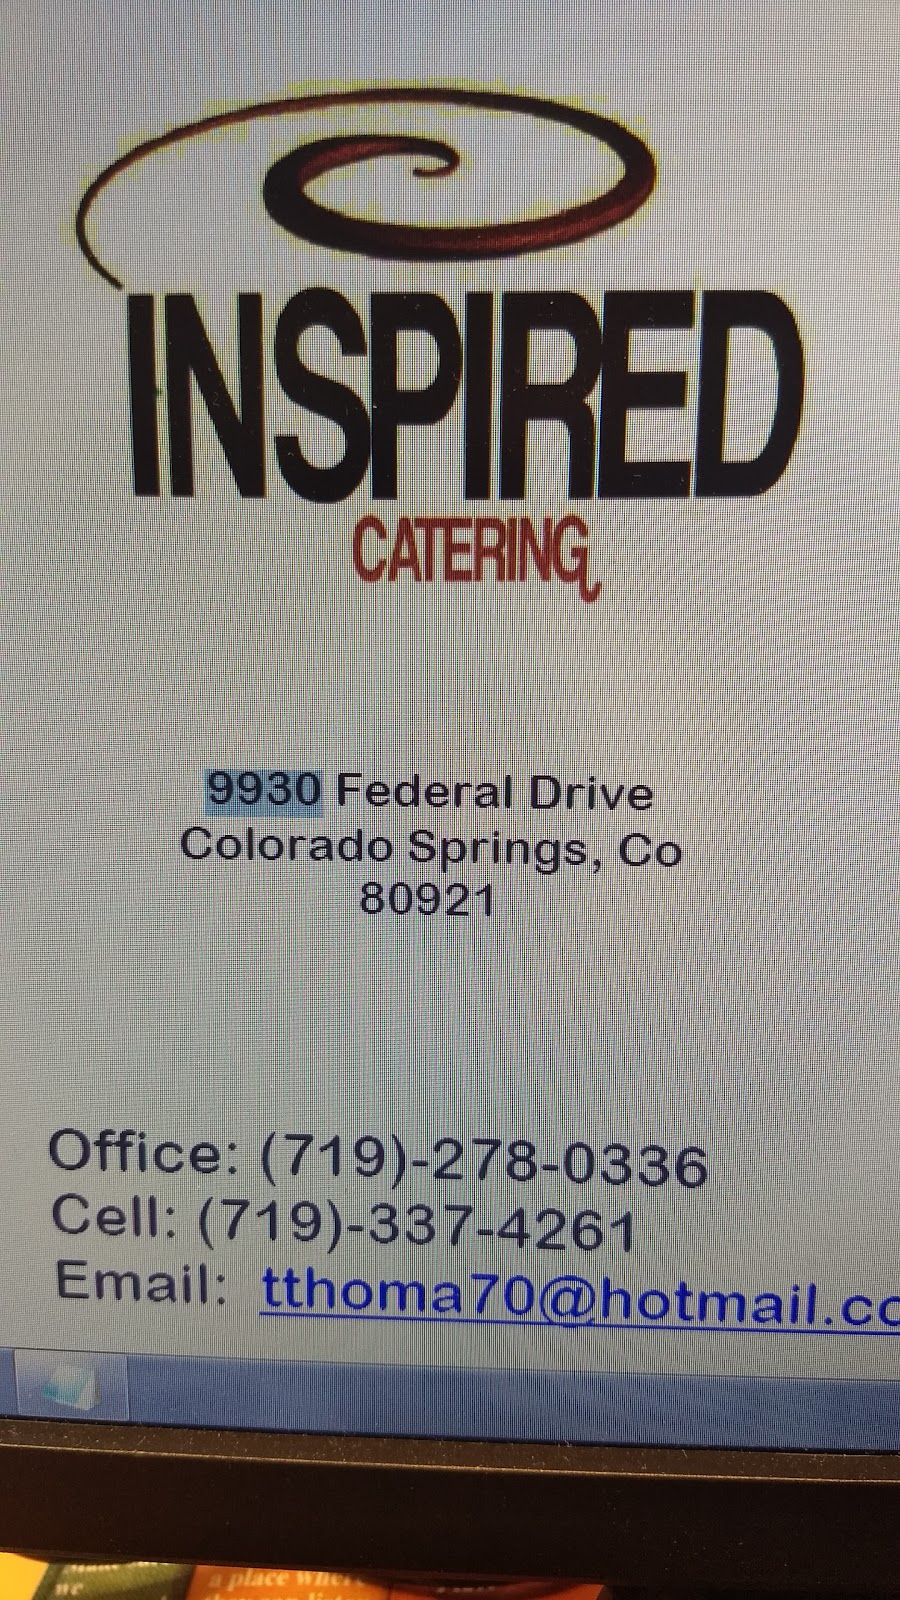 Inspired Catering | 9930 Federal Dr, Colorado Springs, CO 80921 | Phone: (719) 337-4261